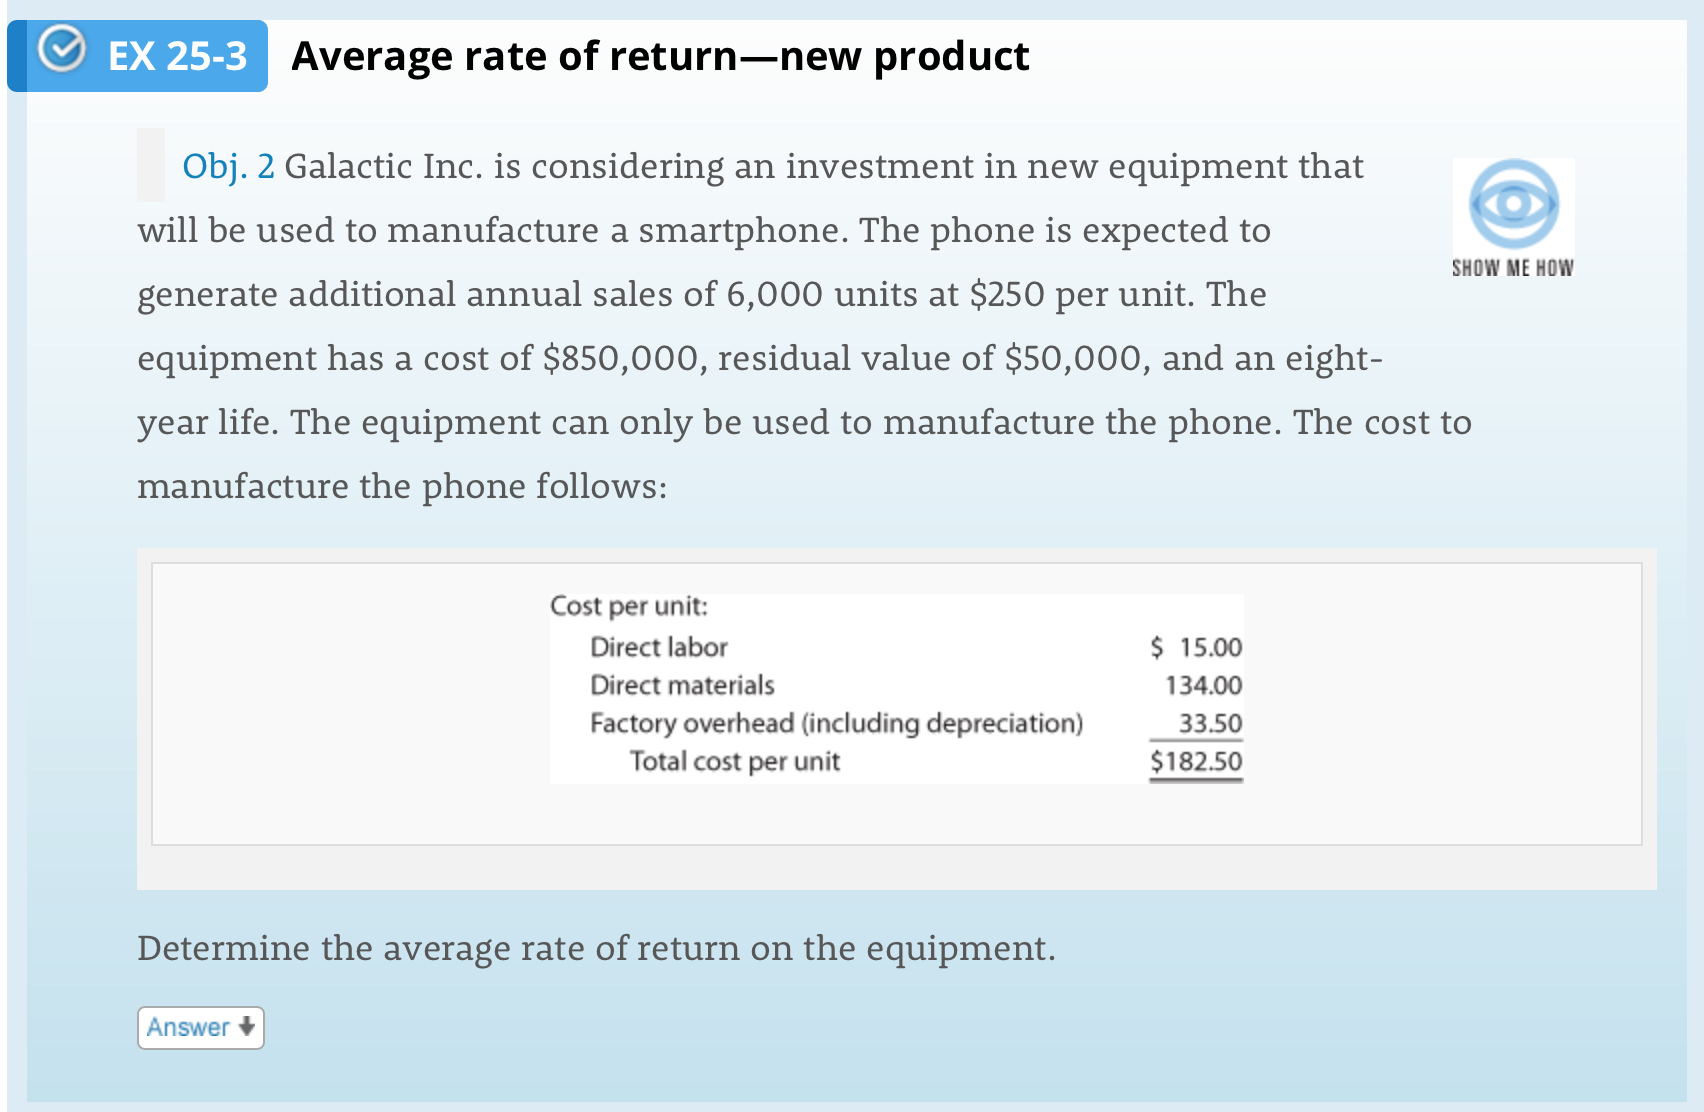 EX 25-3
Average rate of return-new product
Obj. 2 Galactic Inc. is considering an investment in new equipment that
will be used to manufacture a smartphone. The phone is expected to
SHOW ME HOW
generate additional annual sales of 6,000 units at $250 per unit. The
equipment has a cost of $850,000, residual value of $50,000, and an eight-
year life. The equipment can only be used to manufacture the phone. The cost to
manufacture the phone follows:
Cost per unit:
Direct labor
$ 15.00
Direct materials
134.00
Factory overhead (including depreciation)
Total cost per unit
33.50
$182.50
Determine the average rate of return on the equipment.
Answer
